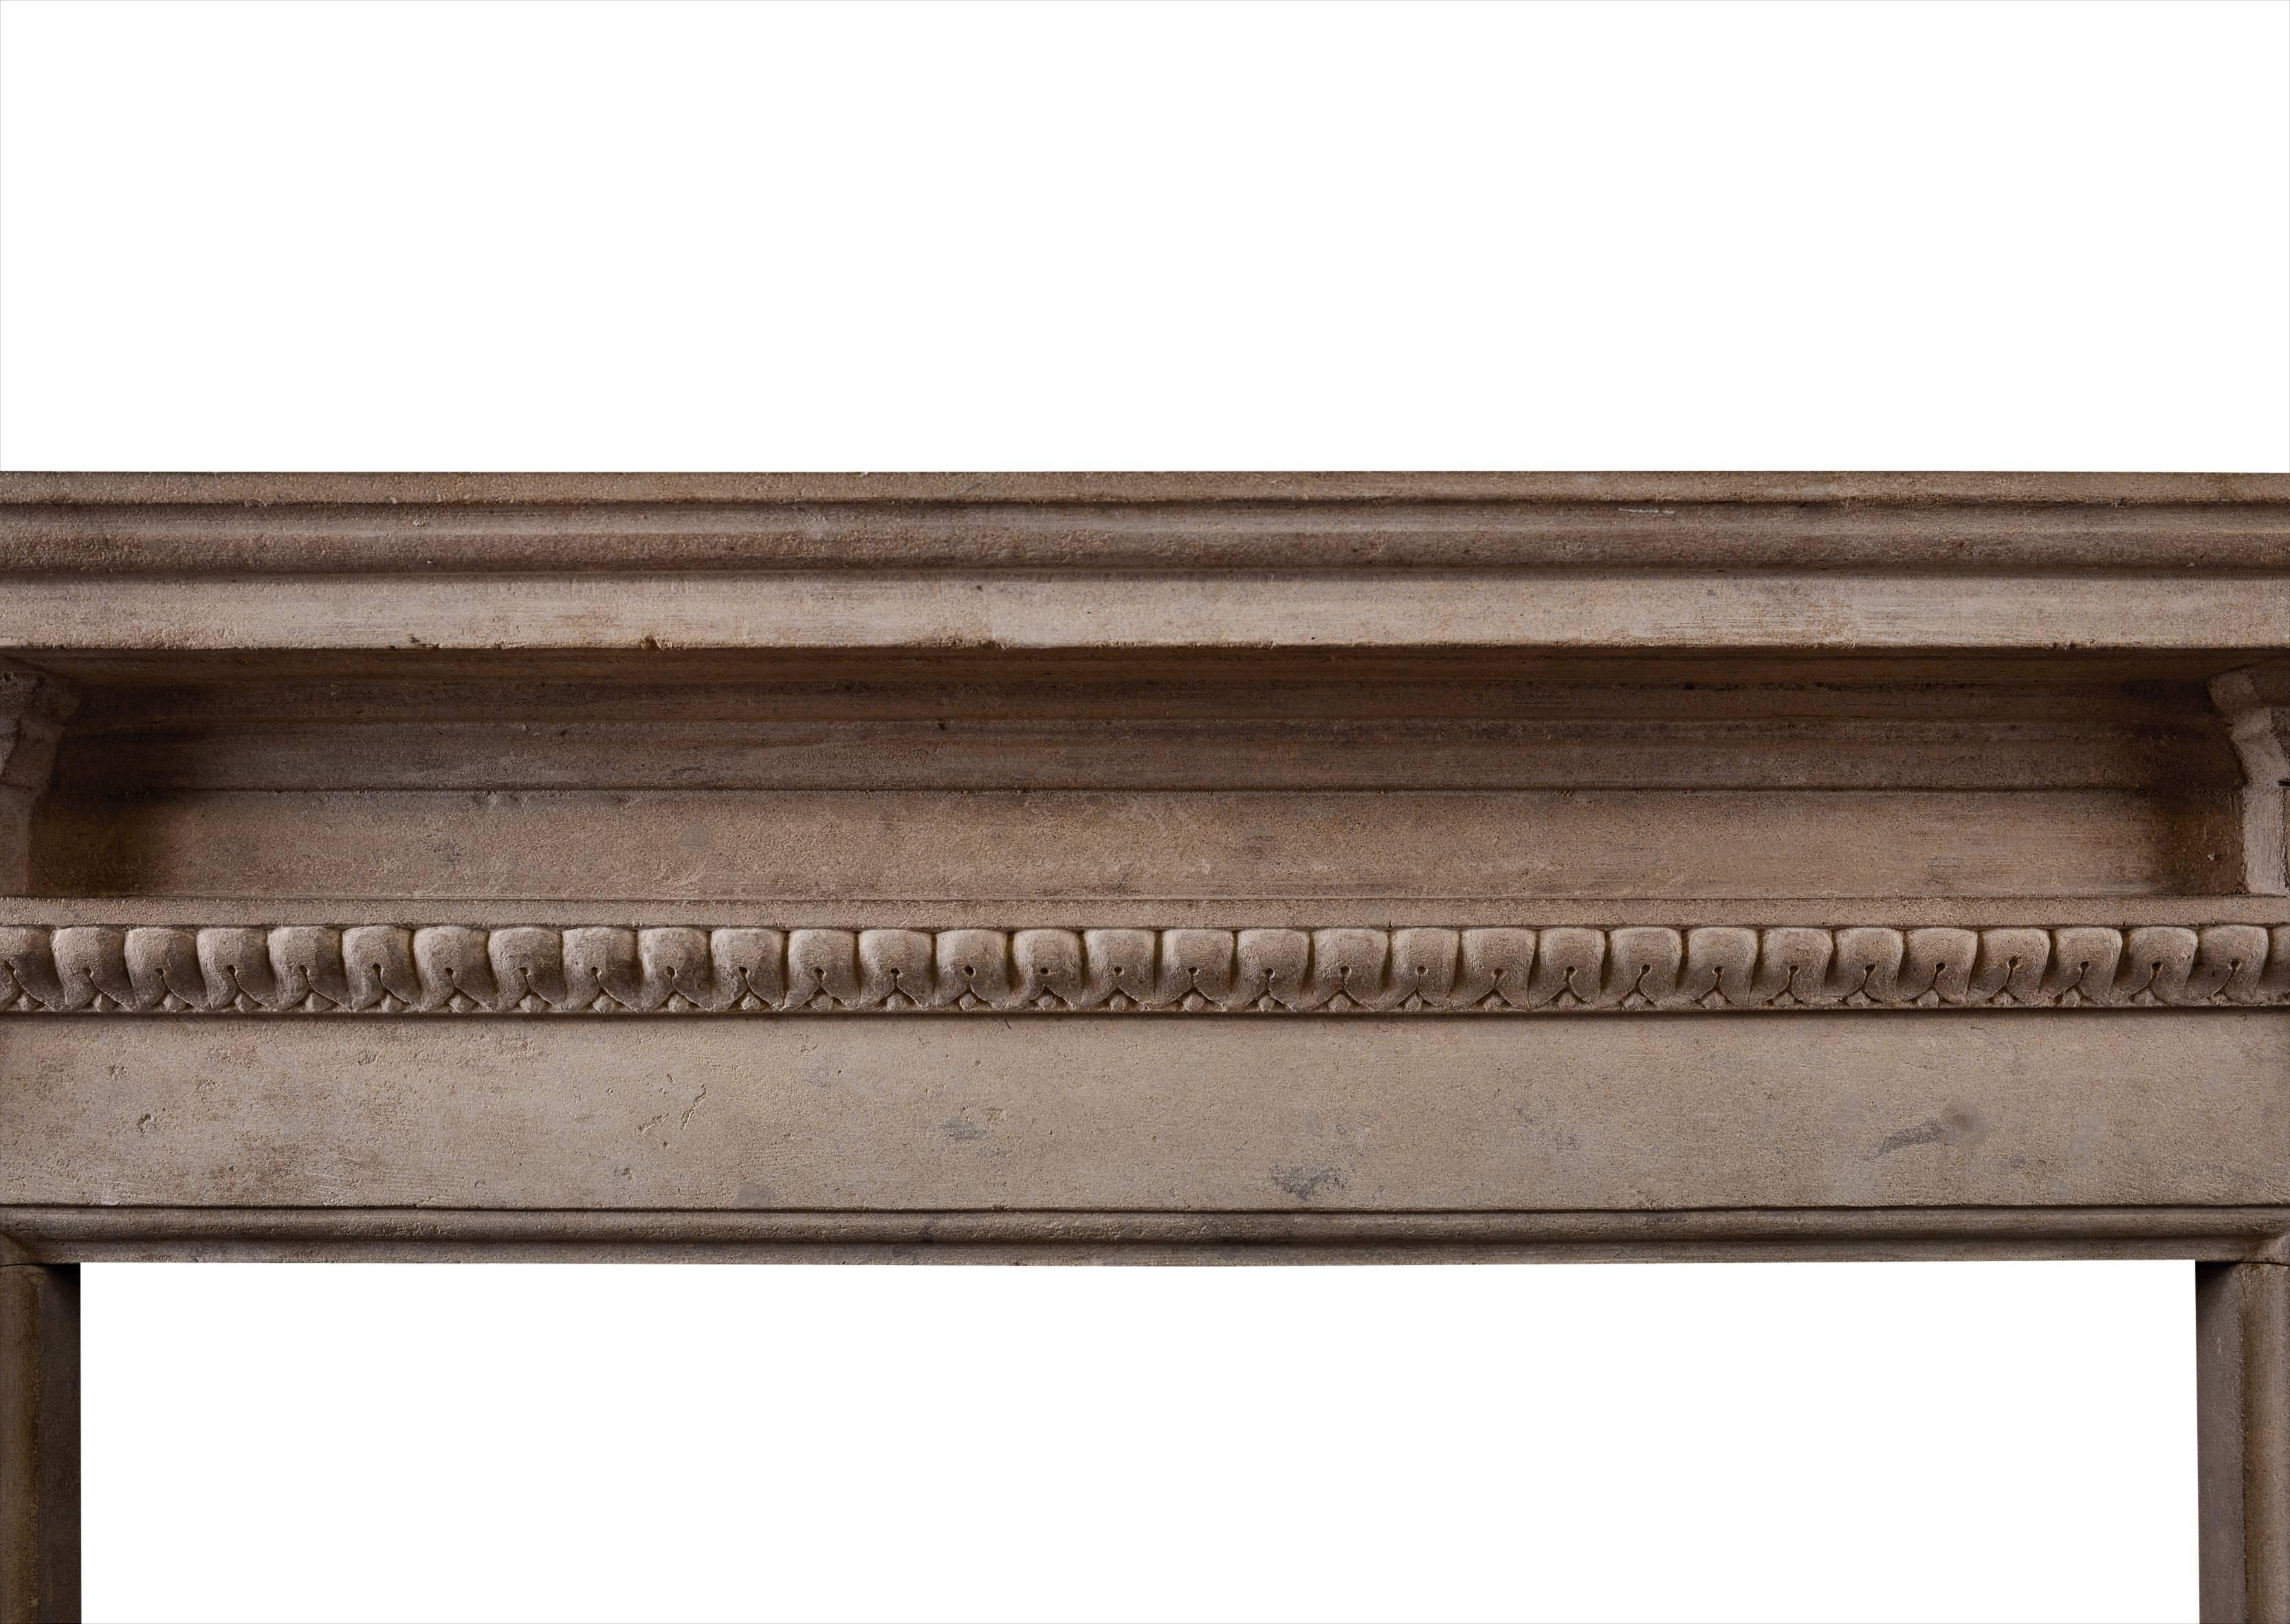 A rustic Georgian style Bath stone fireplace of architectural form. The carved jambs with acanthus leaf mouldings and carved rosette paterae. Moulded shelf above. English. Nice quality patina to stone.

Measures: 
Shelf width: 1615 mm / 63 5/8